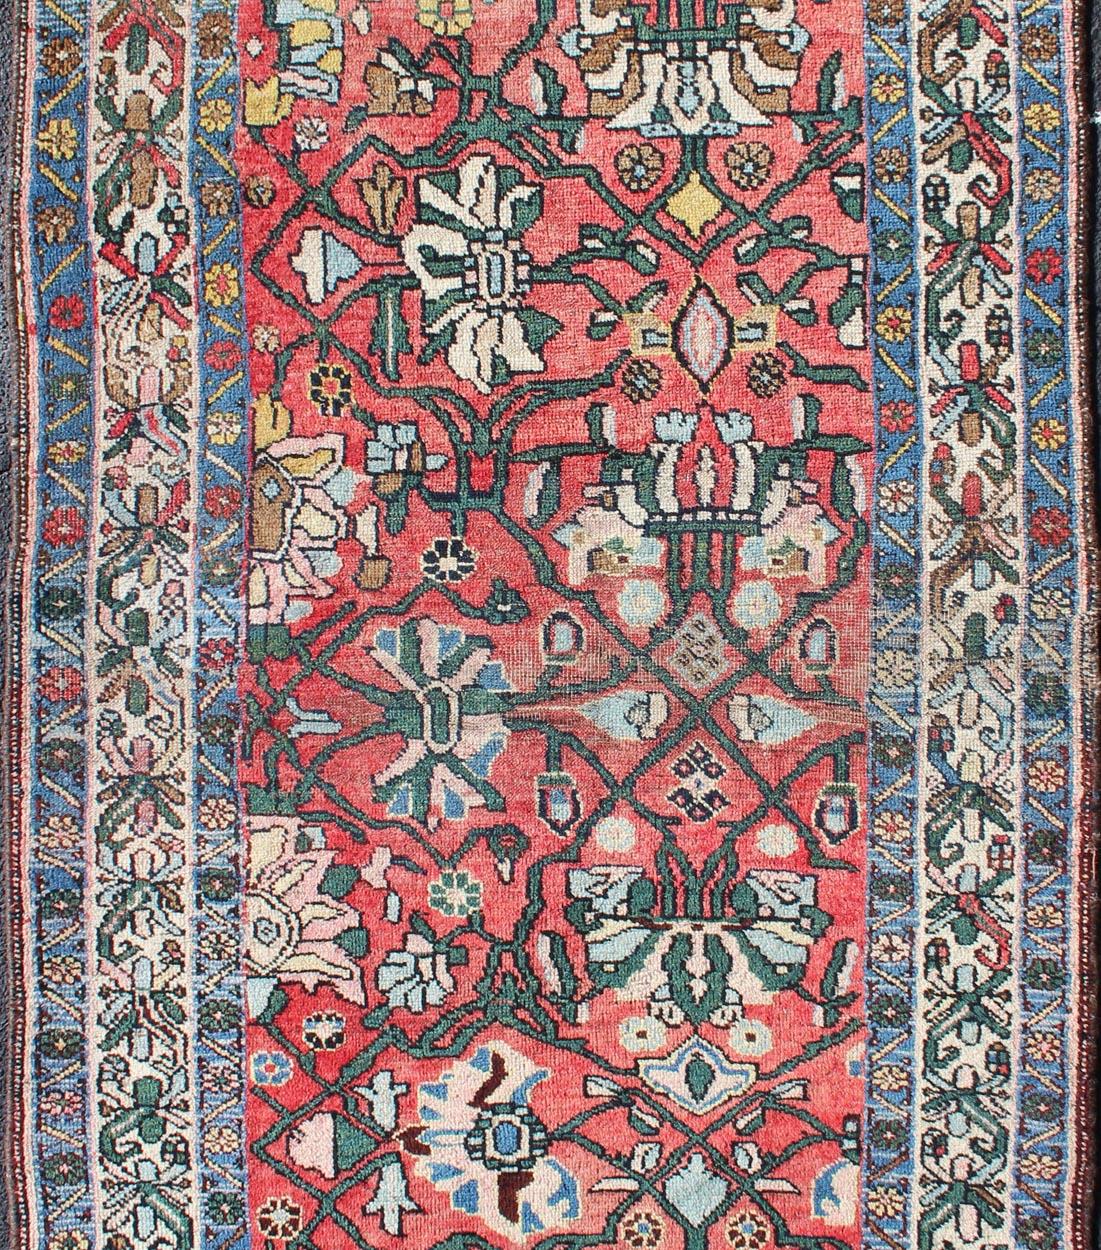 Hand-Knotted Antique Persian Bidjar Rug with Large Floral Motifs in Soft Red, Green & Blue For Sale